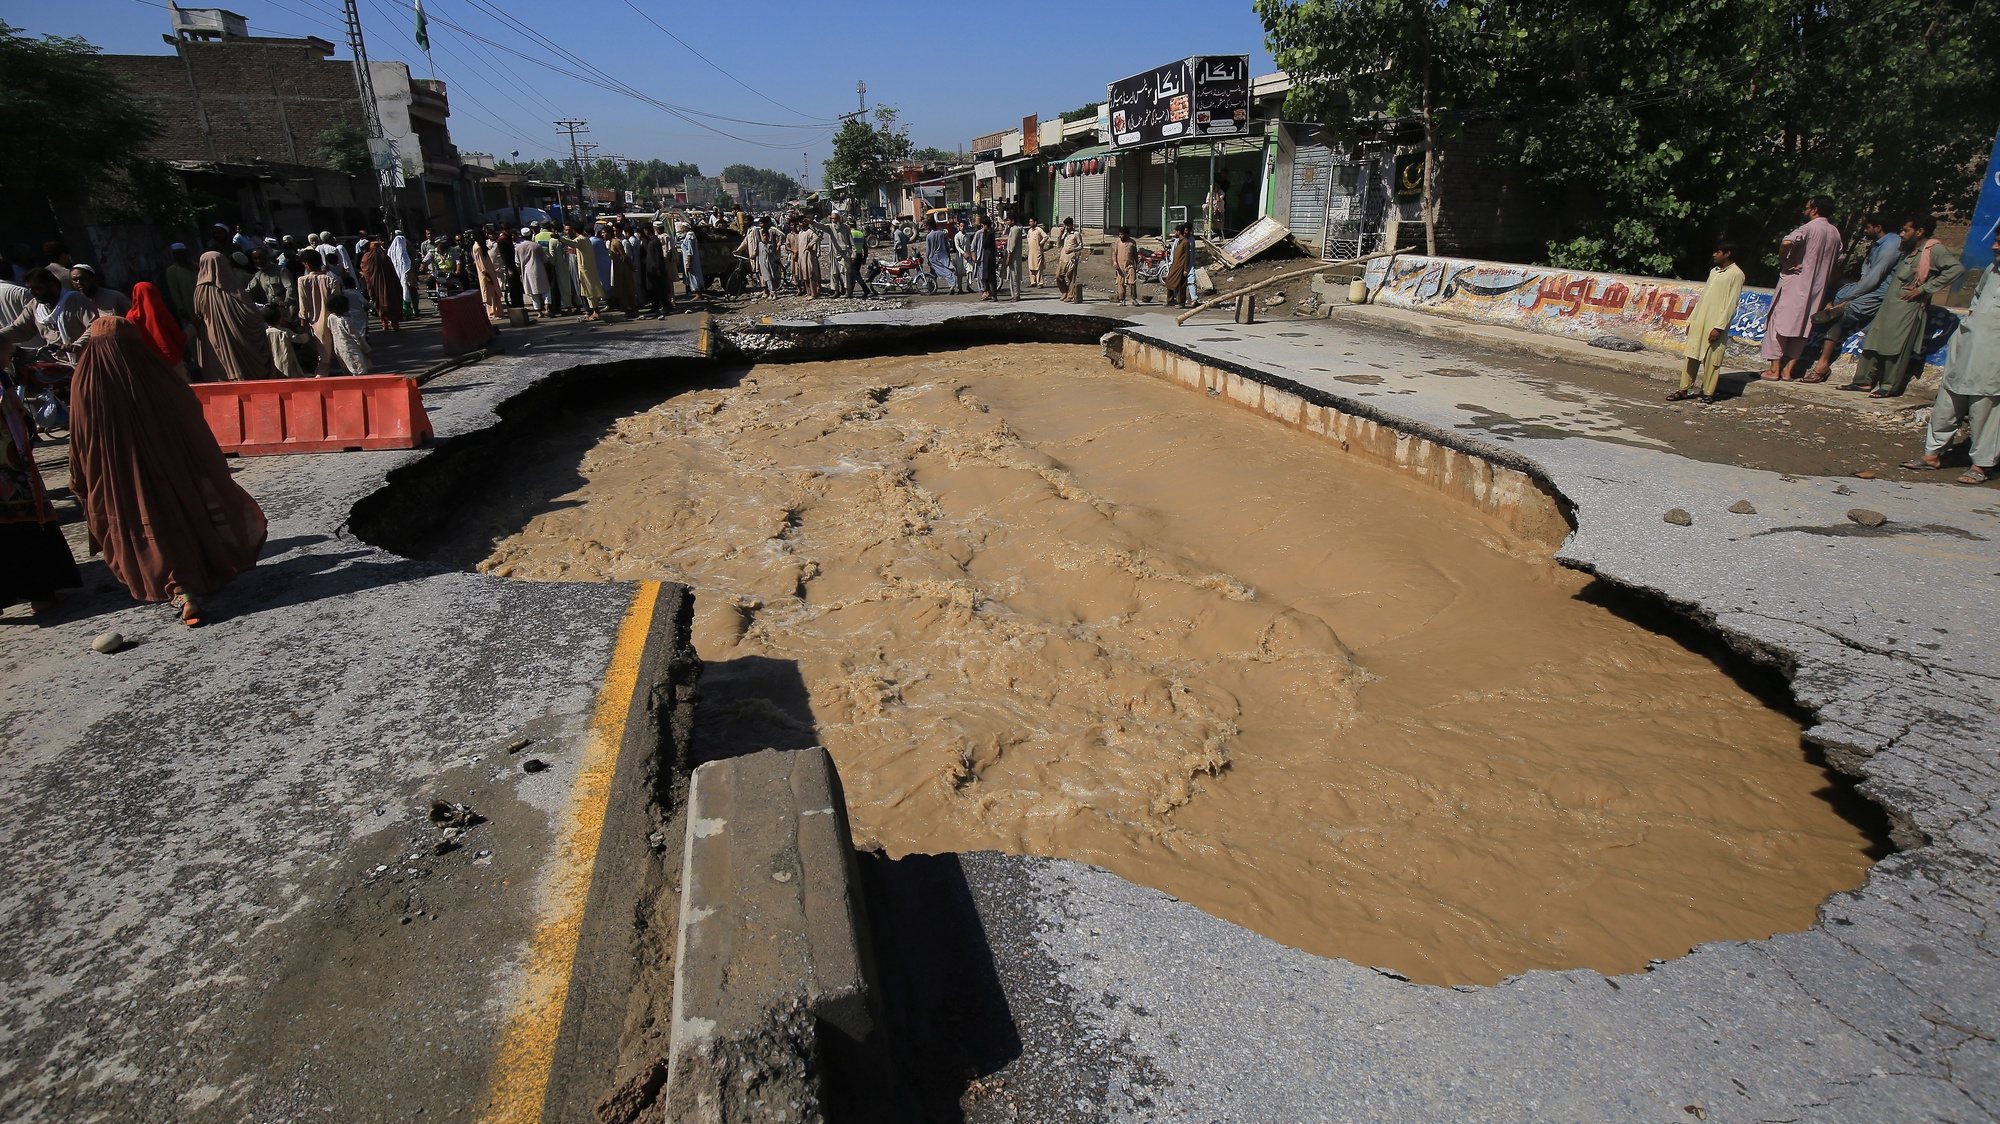 epa10143334 A damaged road in the aftermath of floods in Charsadda District, Khyber Pakhtunkhwa province, Pakistan, 28 August 2022. According to the National Disaster Management Authority (NDMA) on 27 August, flash floods triggered by heavy monsoon rains have killed over 1,000 people across Pakistan since mid-June 2022. More than 33 million people have been affected by floods, the country&#039;s climate change minister said.  EPA/ARSHAD ARBAB